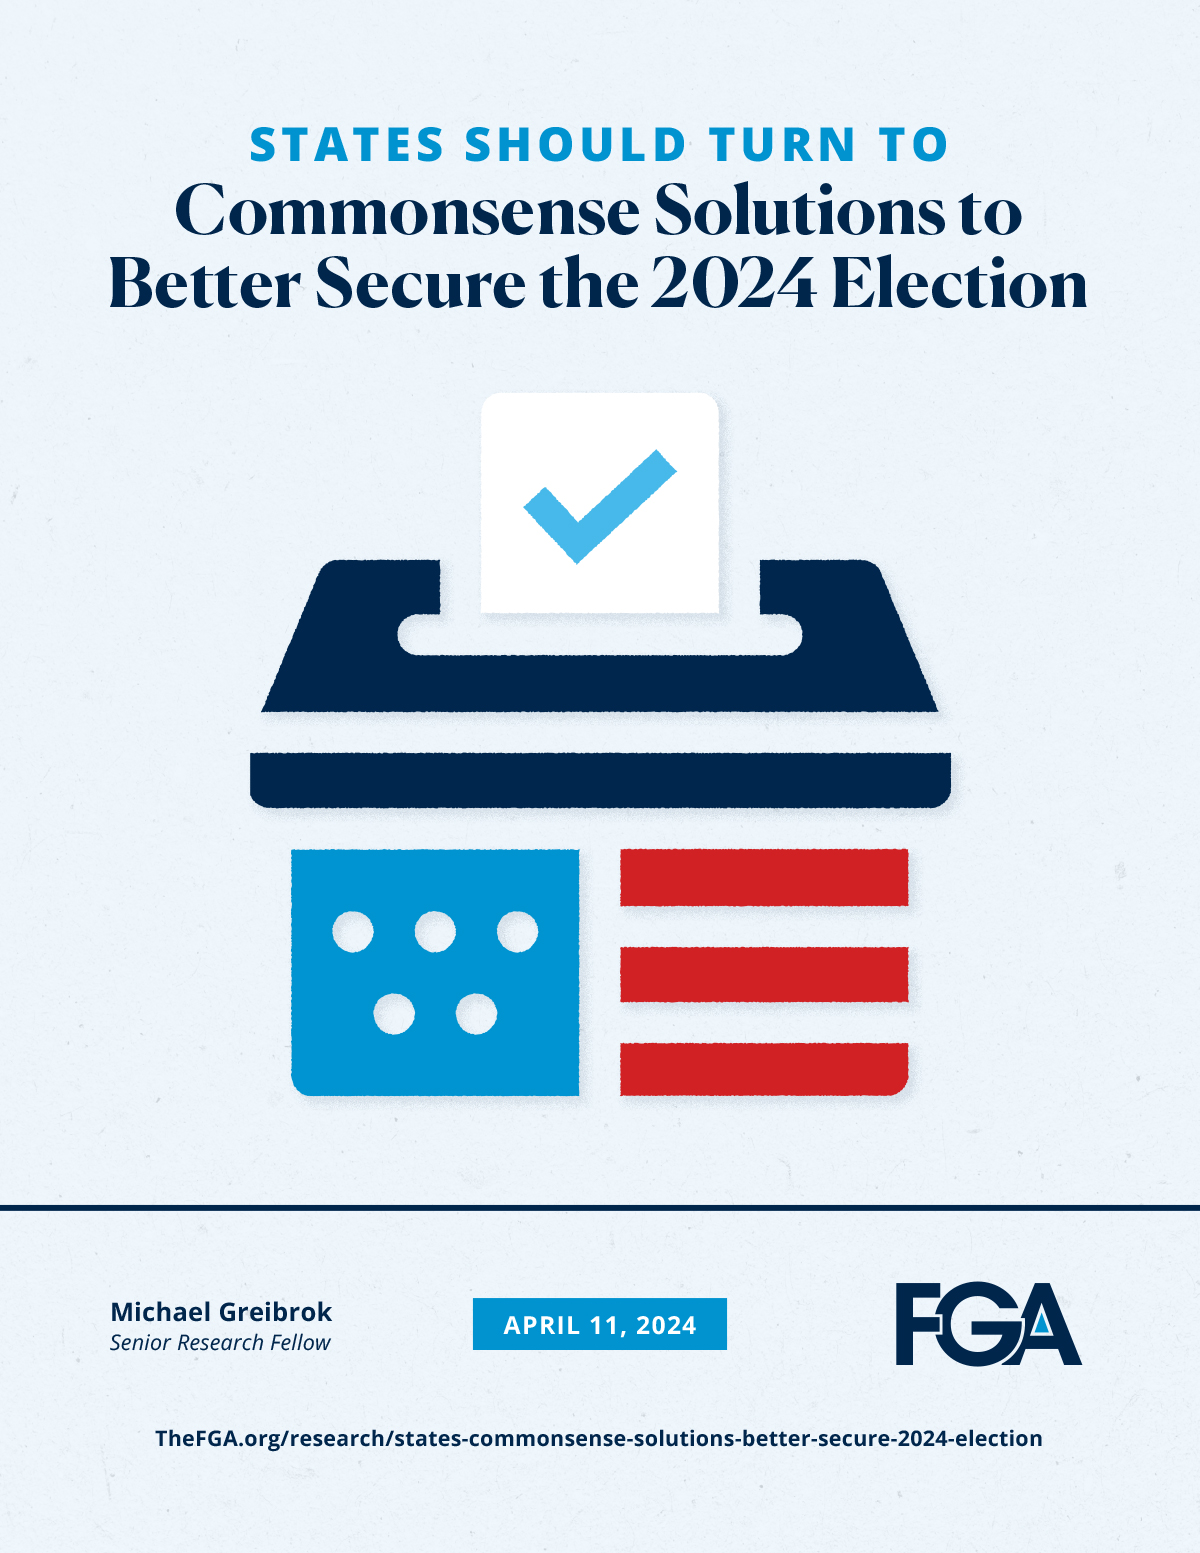 States Should Turn to Commonsense Solutions to Better Secure the 2024 Election